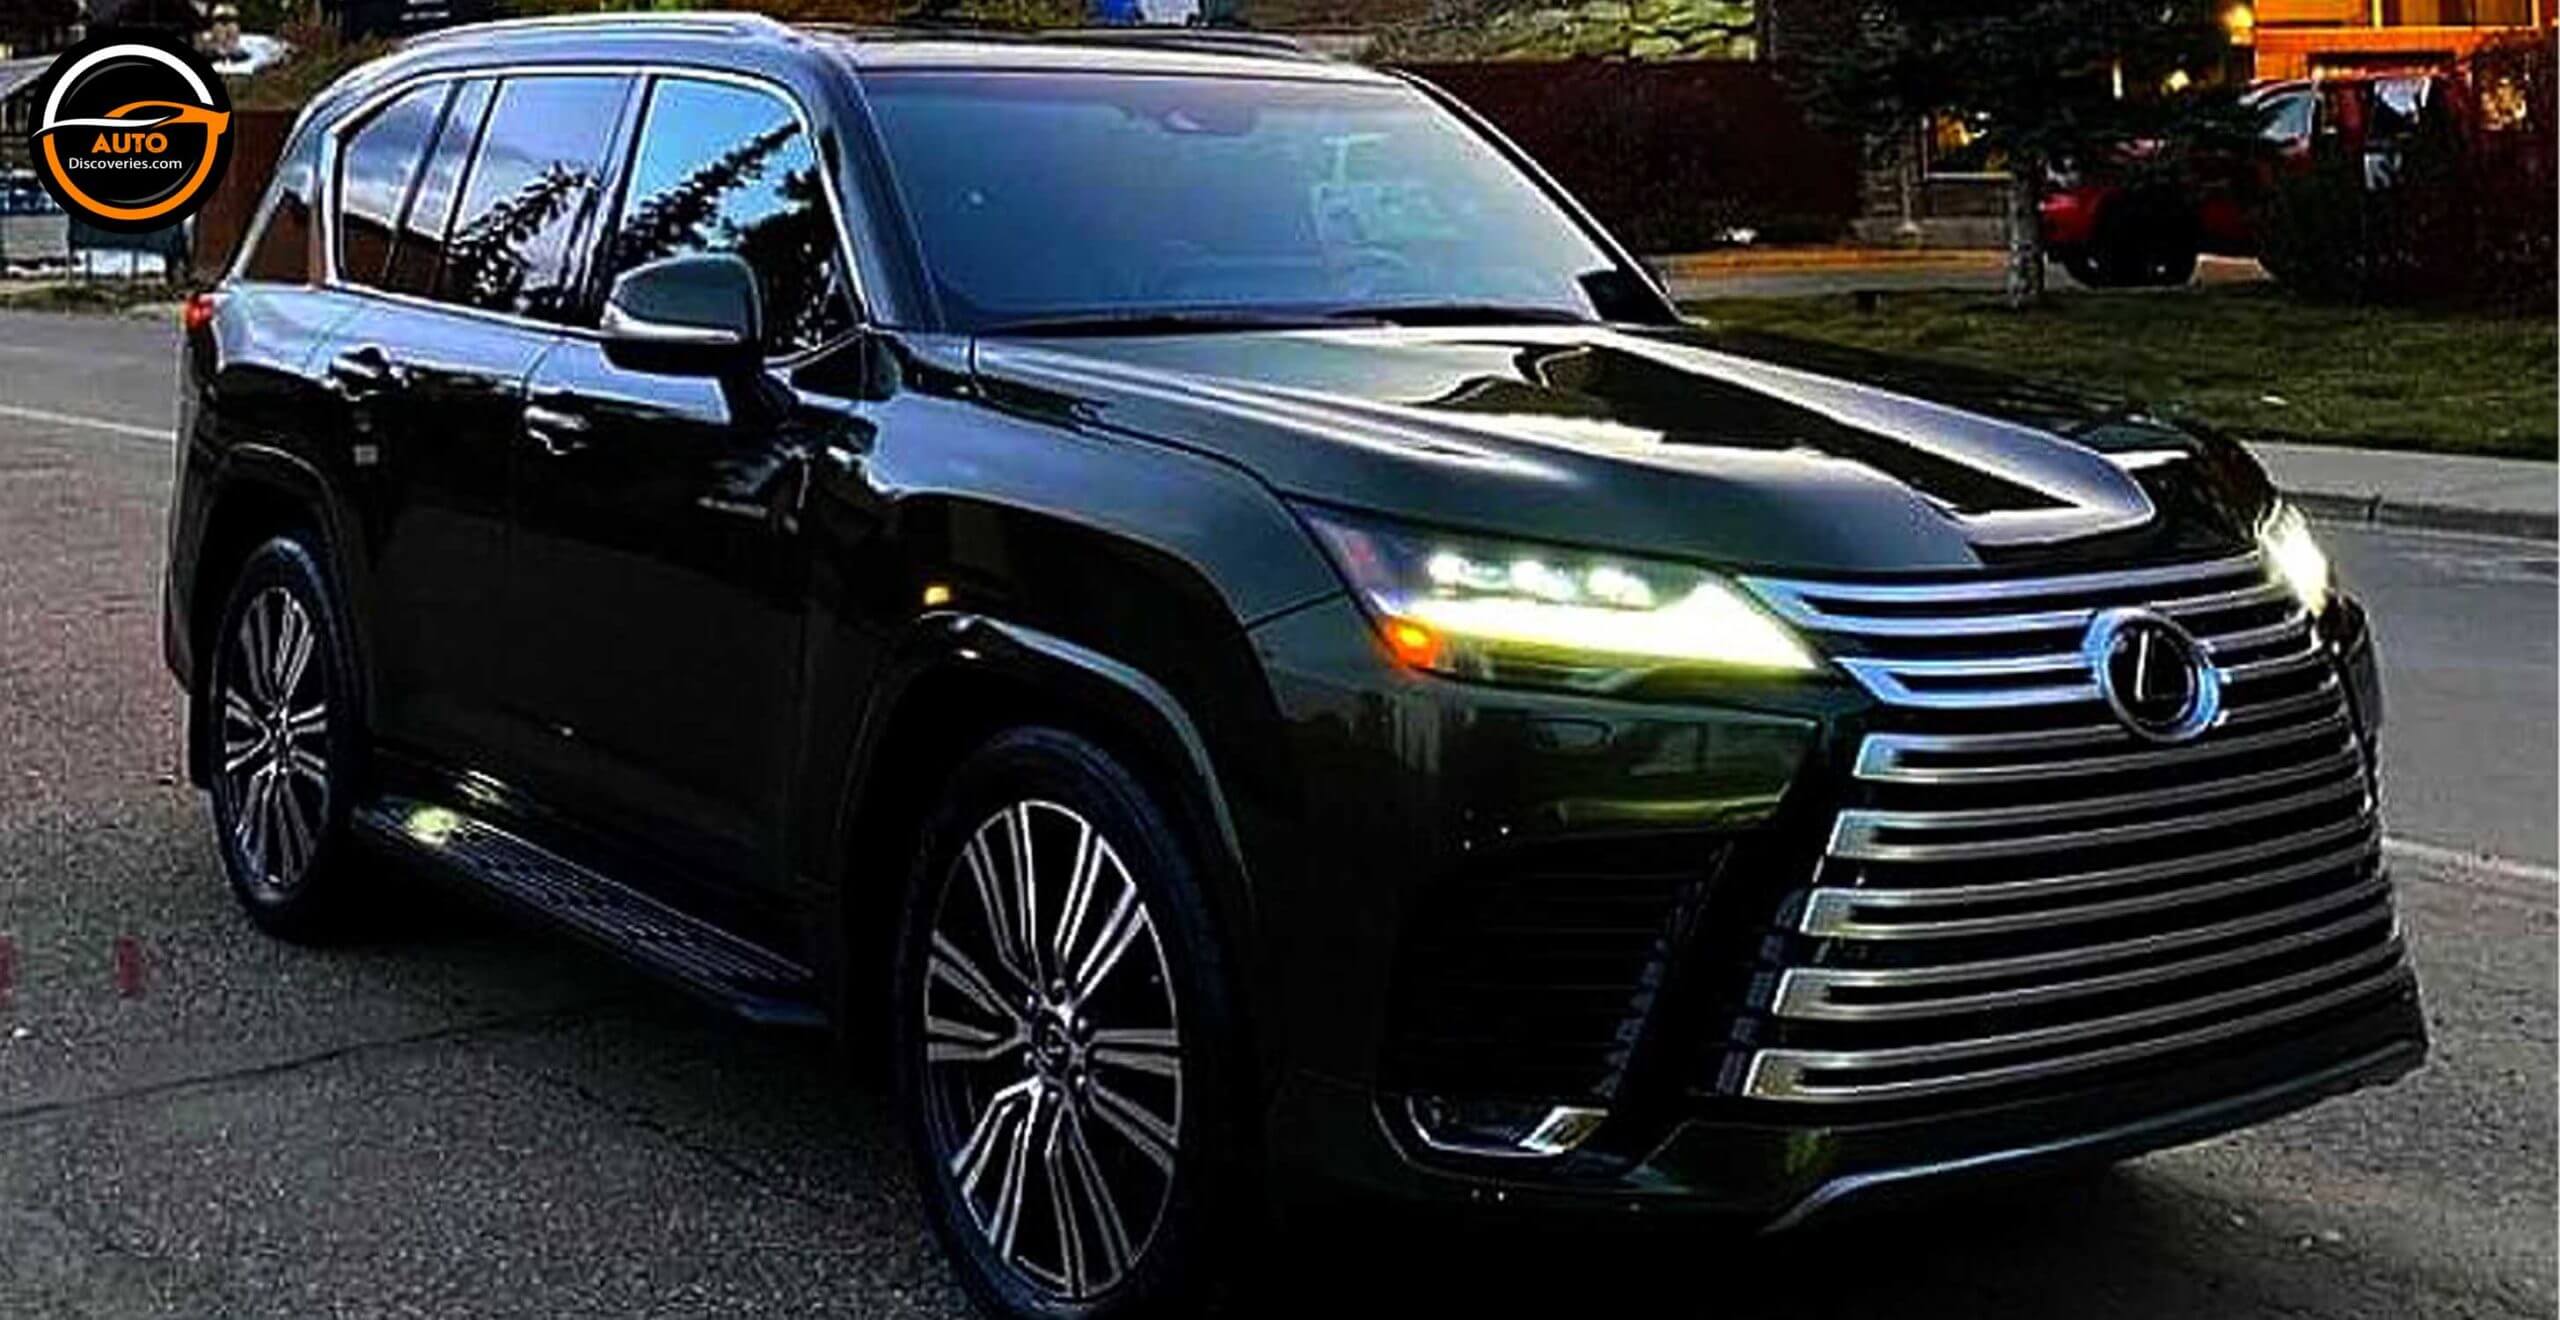 2022 Lexus LX600 In Army Green Ultra Luxurious SUV Scaled 